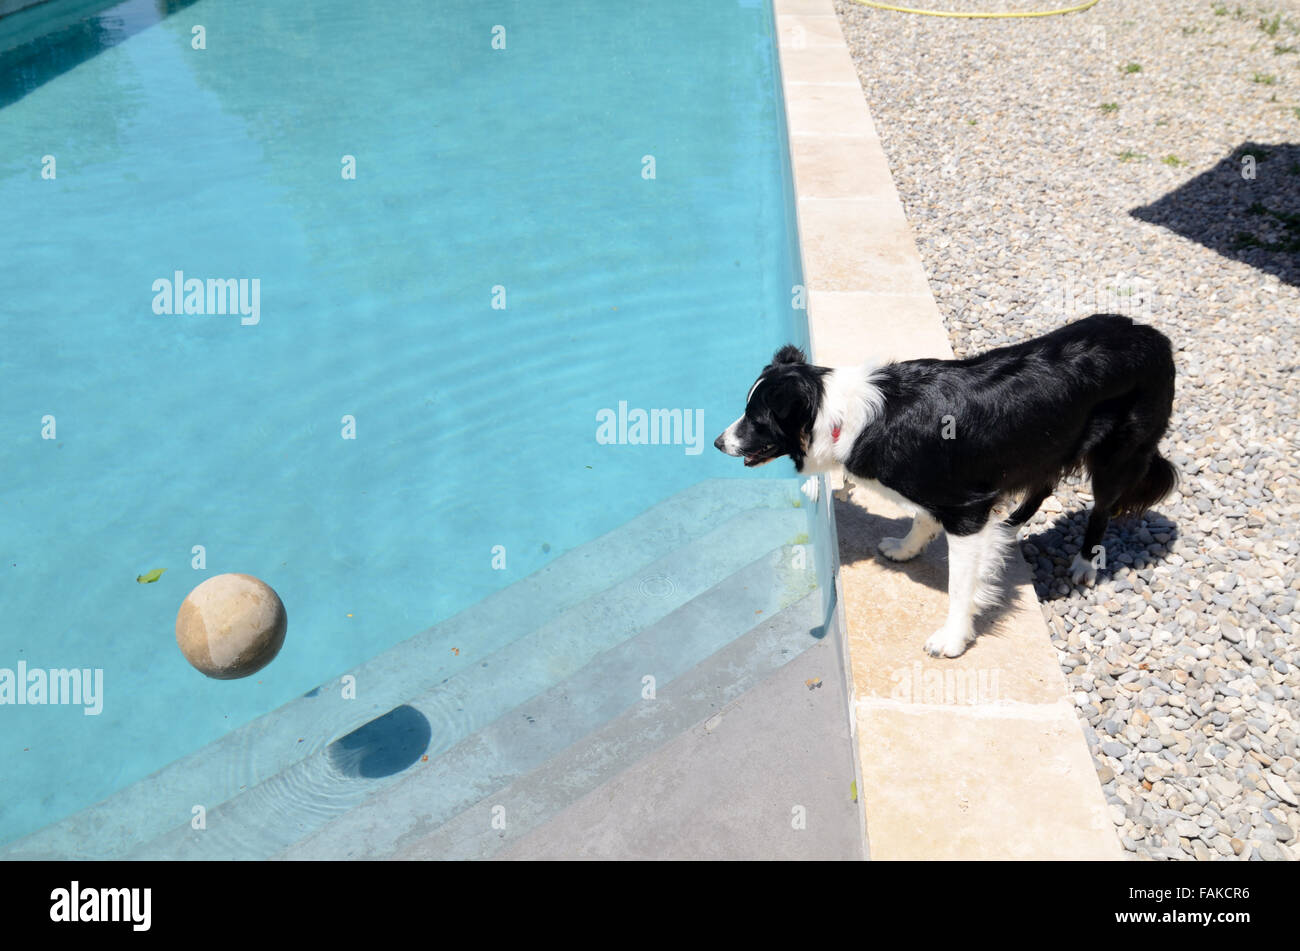 Curious Border Collie or Sheep Dog Watches a Ball in Swimming Pool Stock Photo